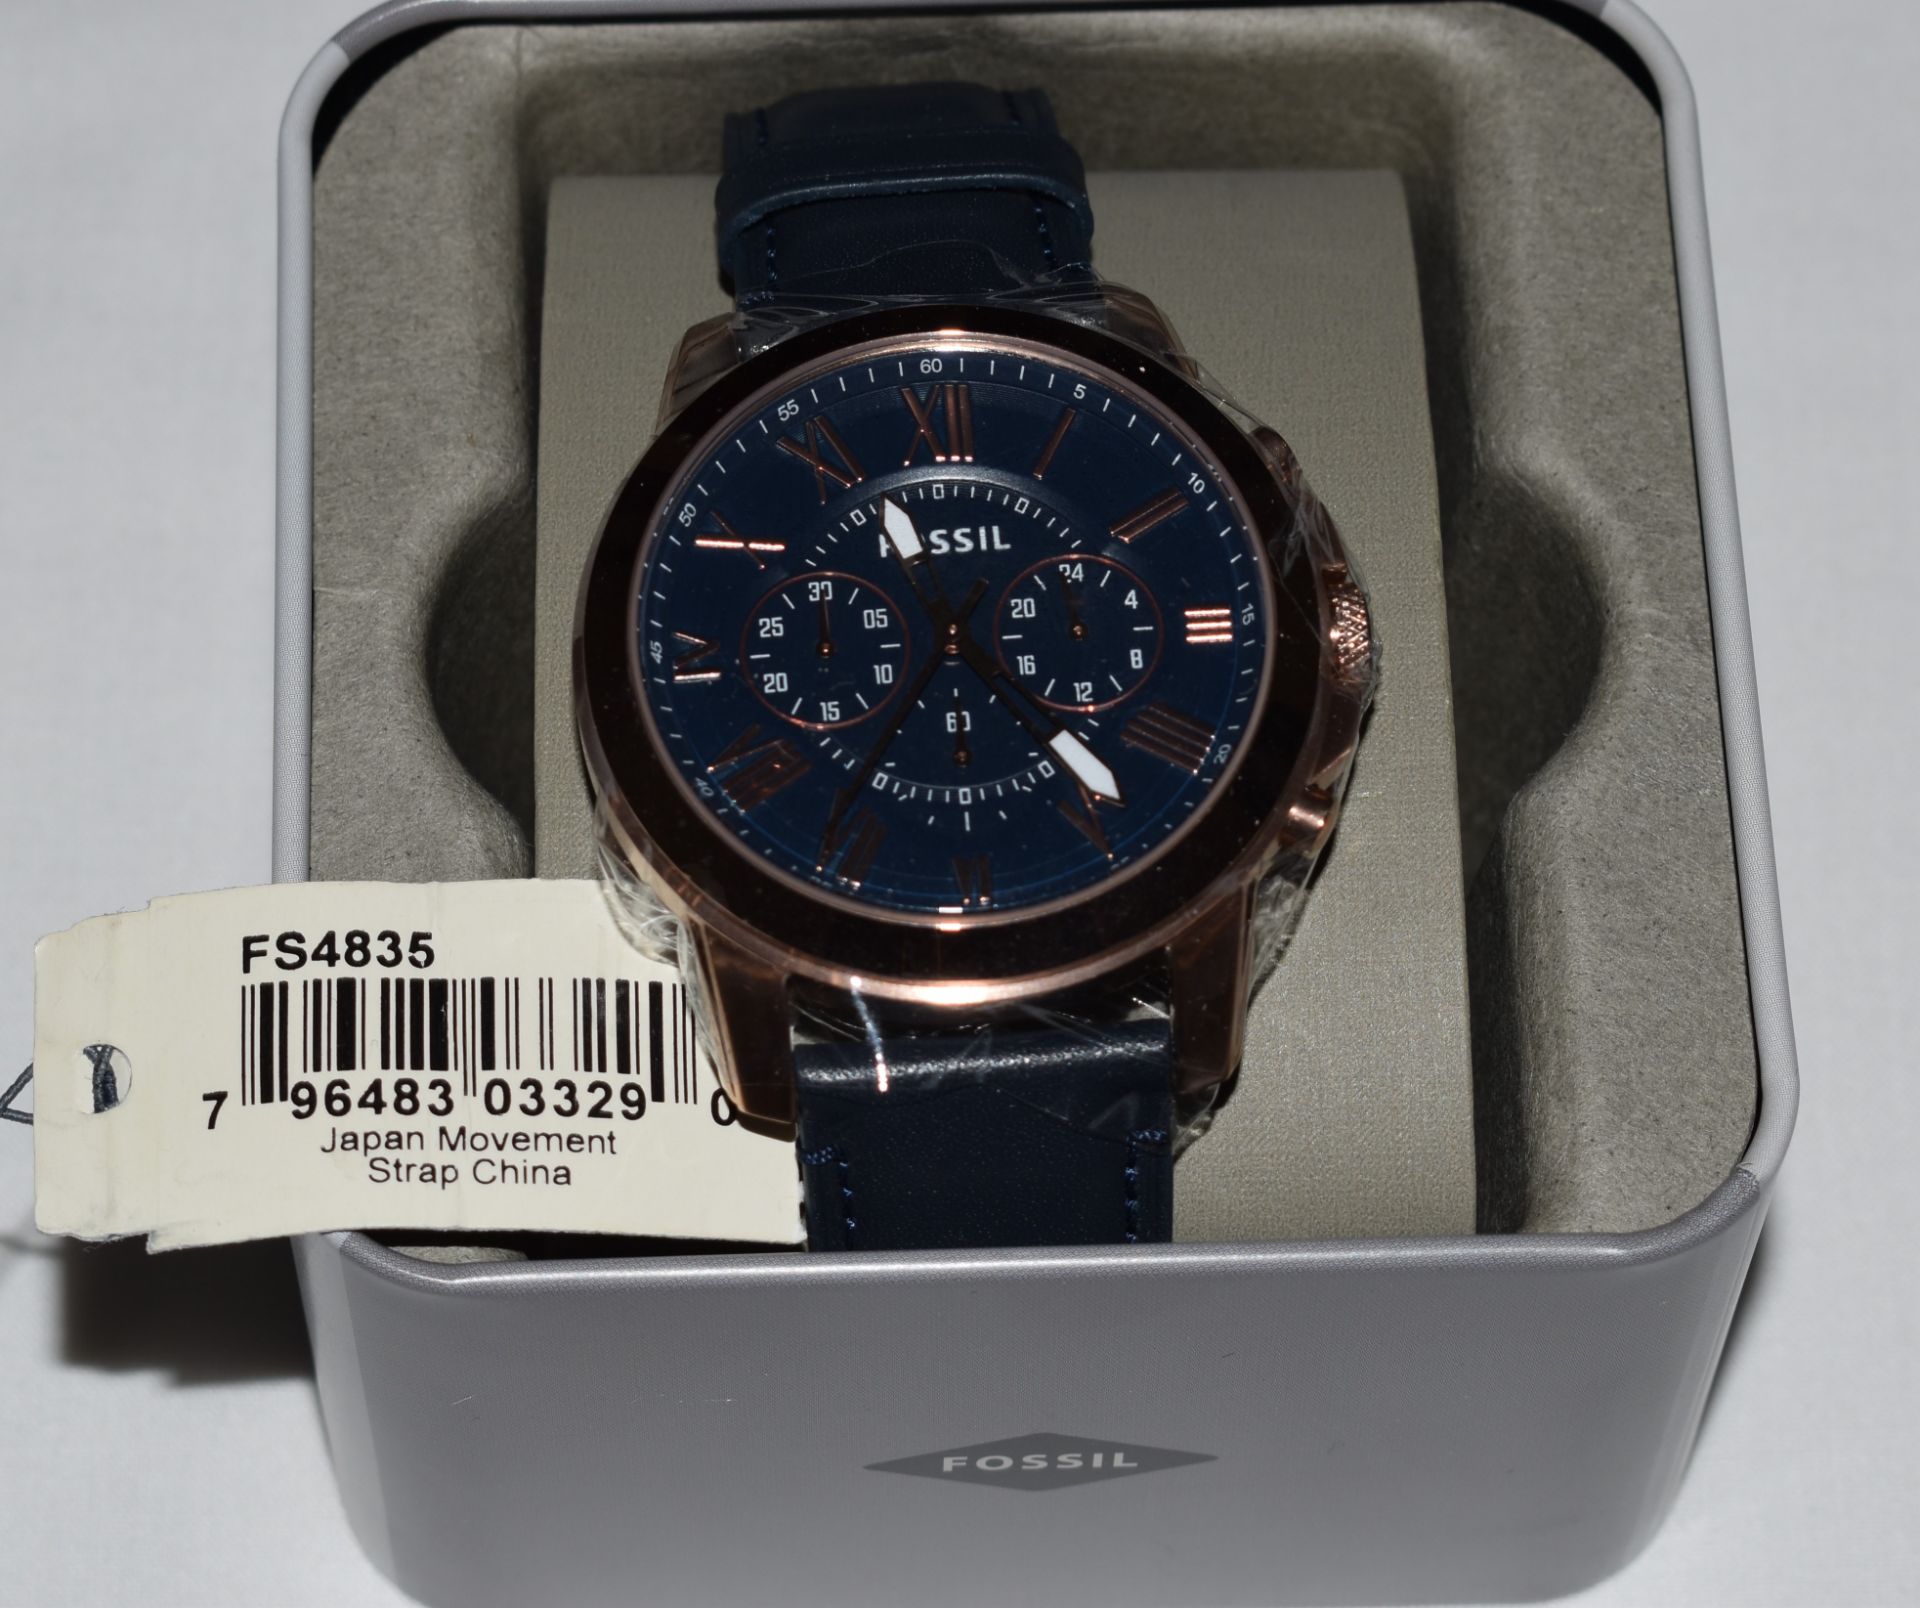 Fossil Men's Watch FS 4835 - Image 2 of 2